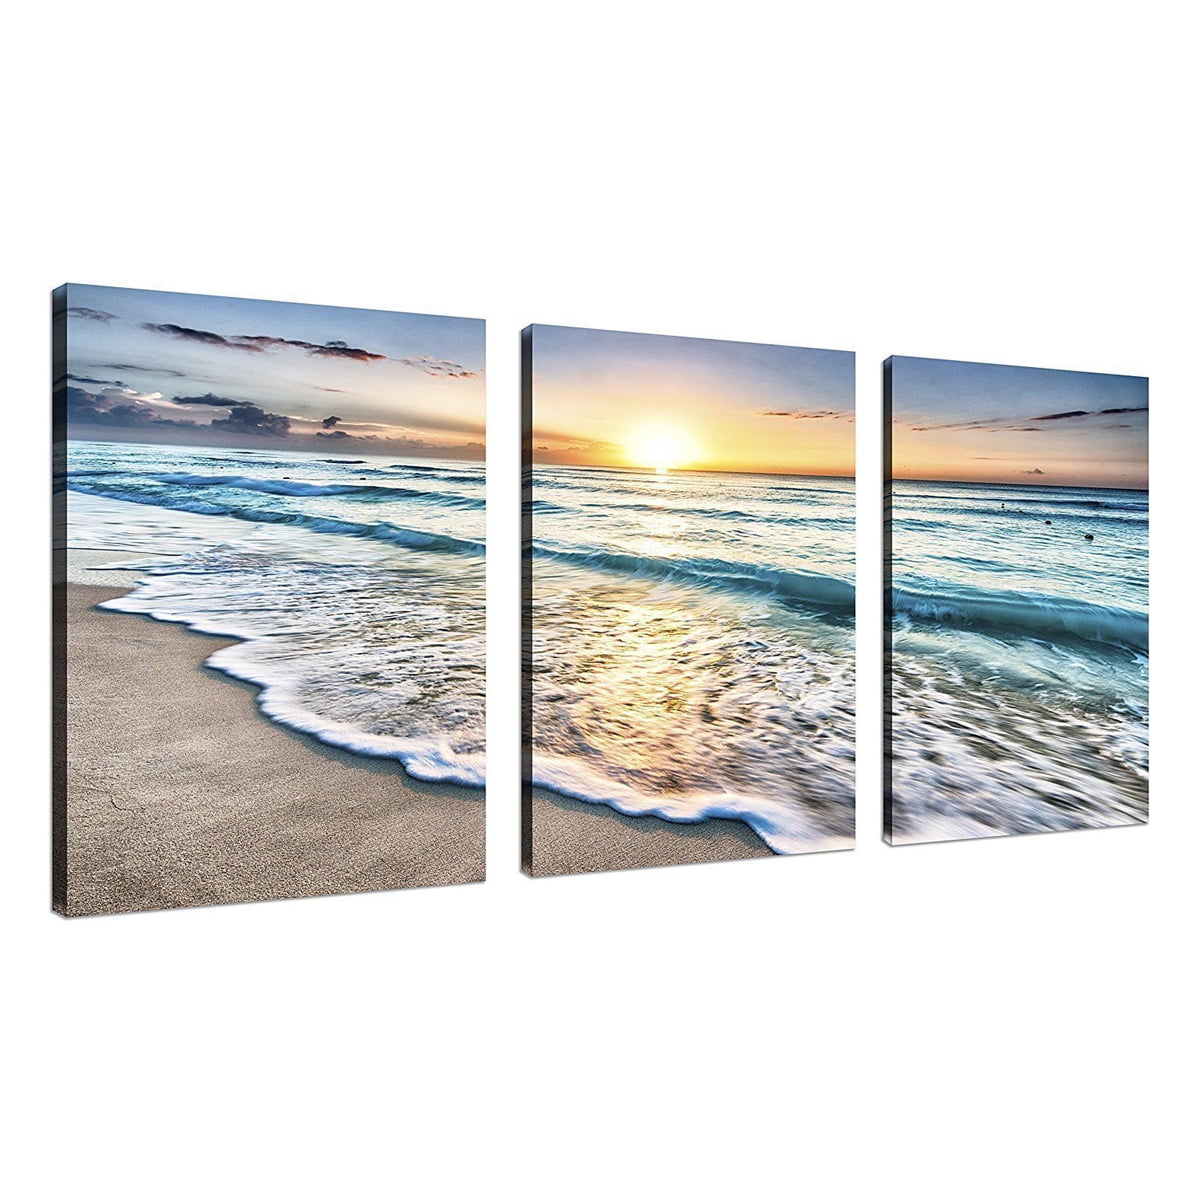 Stretched Framed Wall Pictures Posters For Living Room Decor Water Landscape Art 